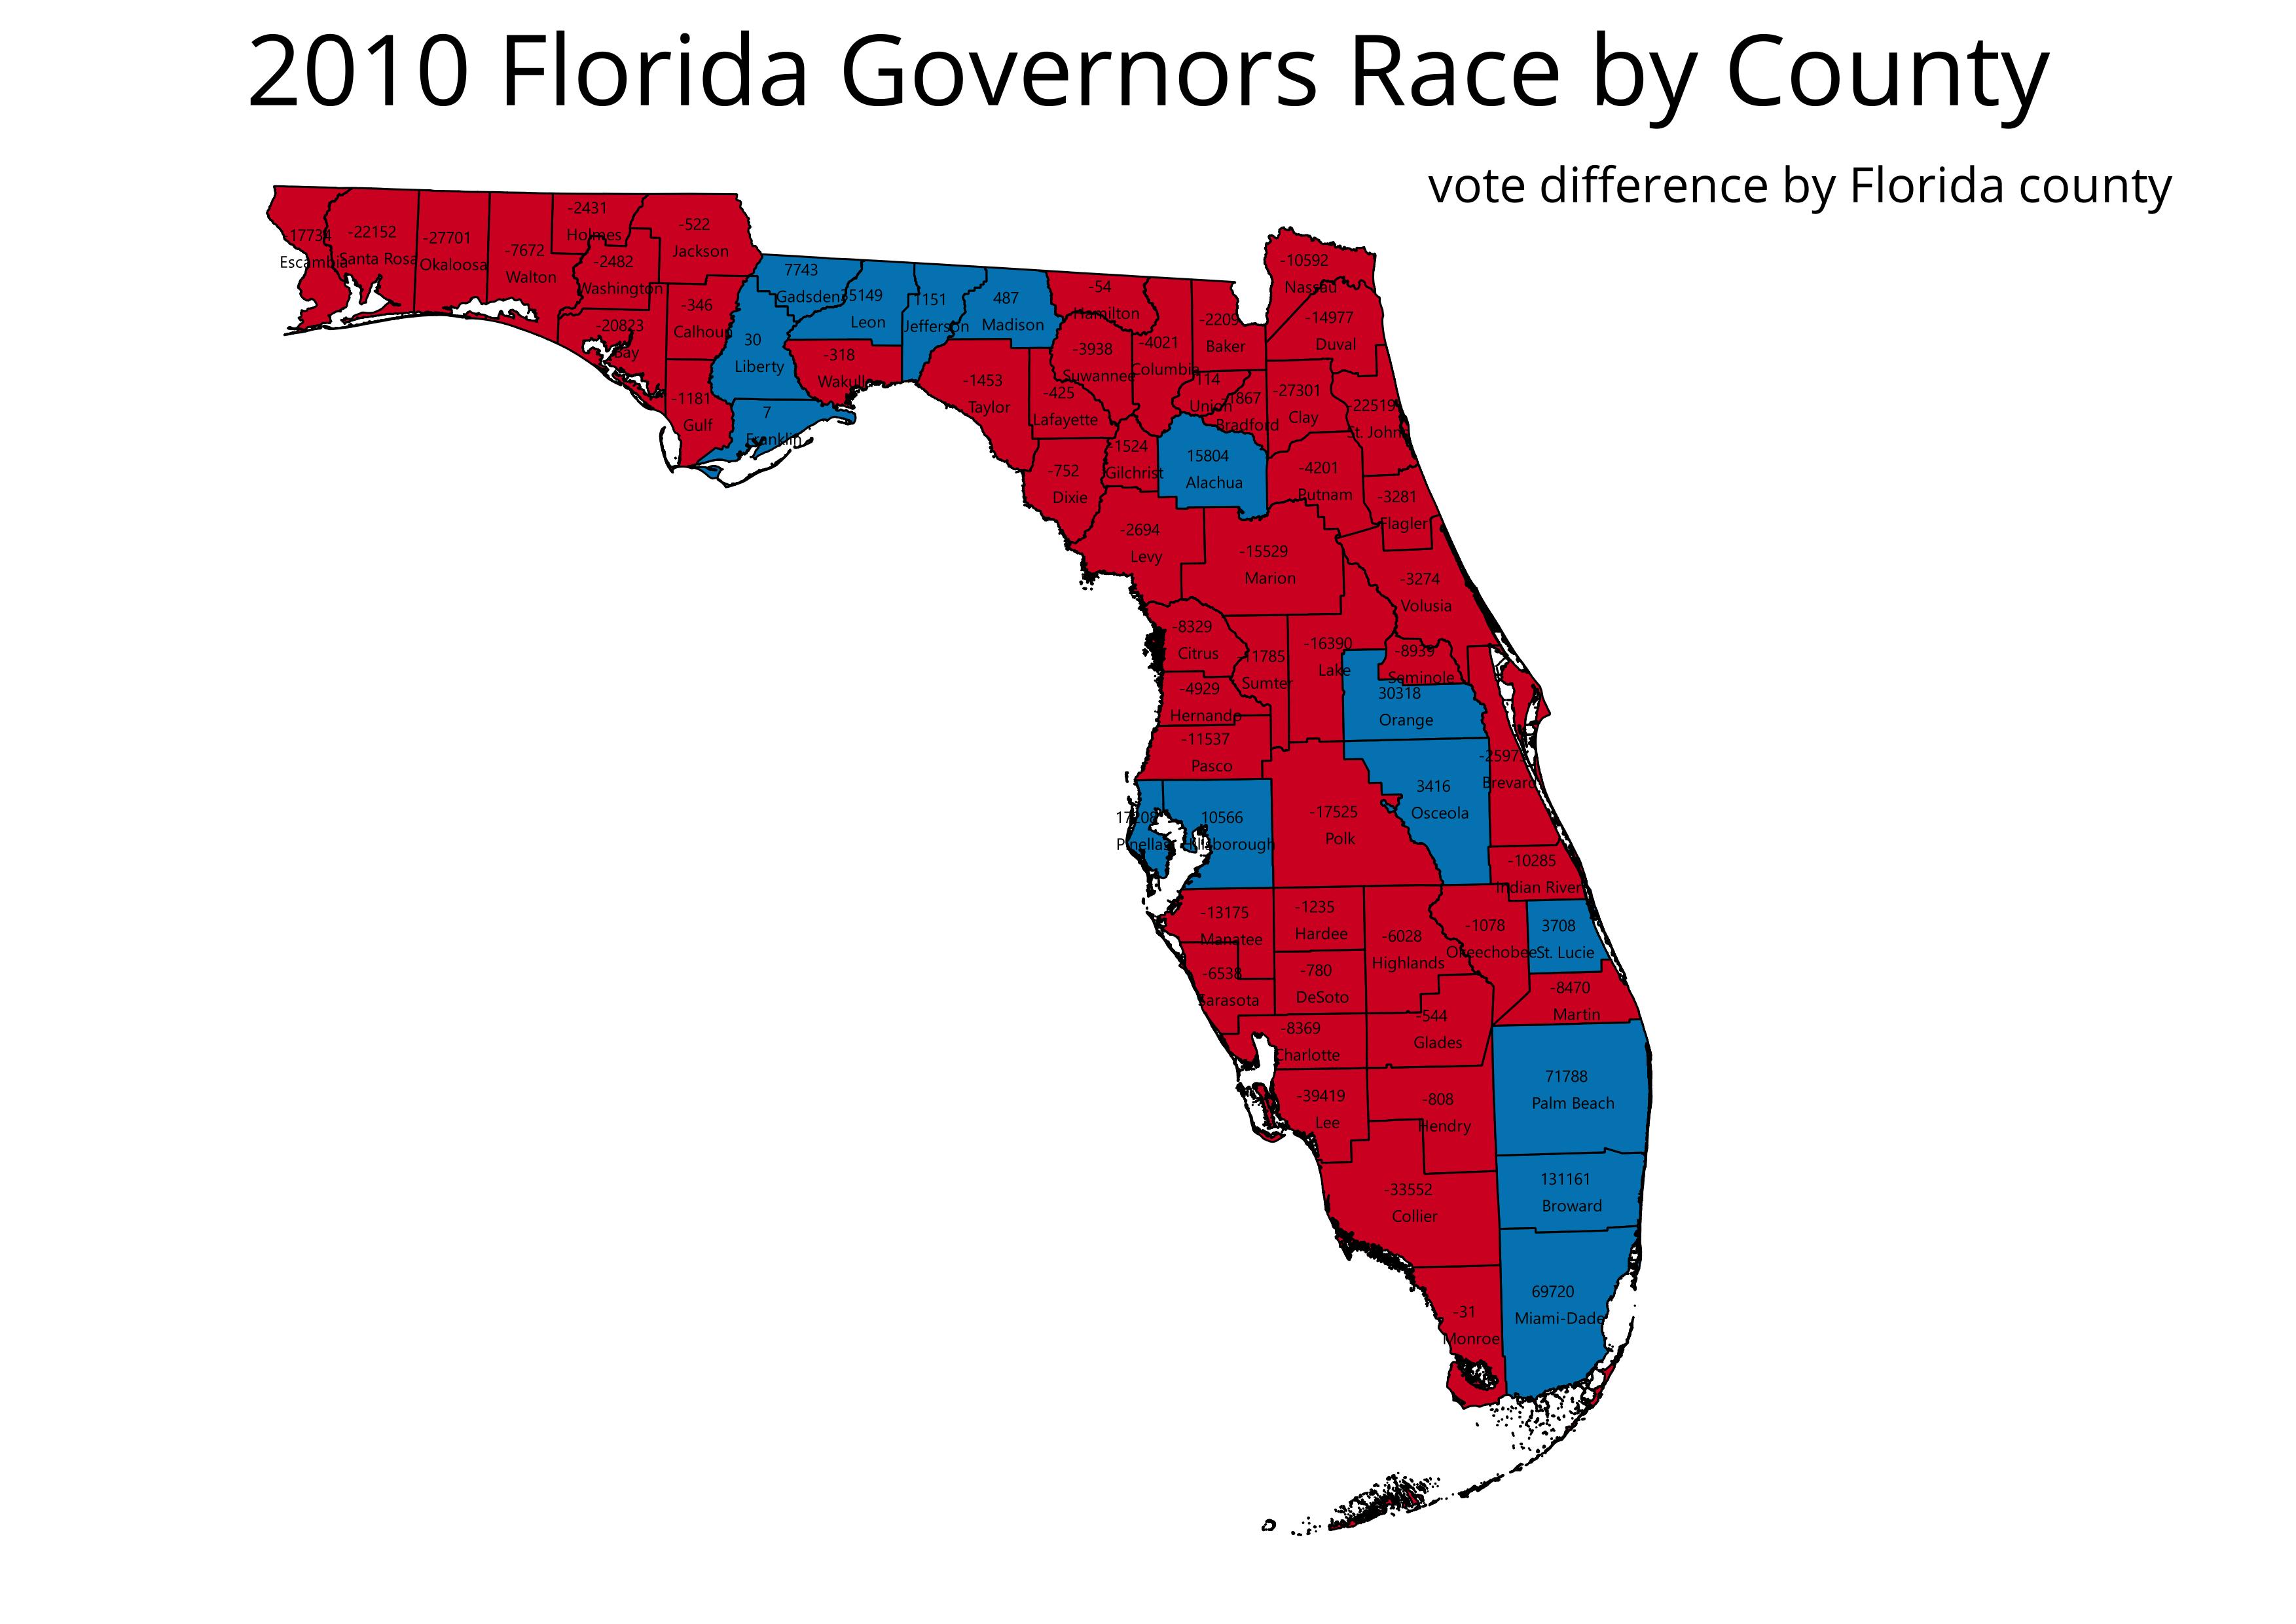 How will the 2014 Florida Governor's Map Change?